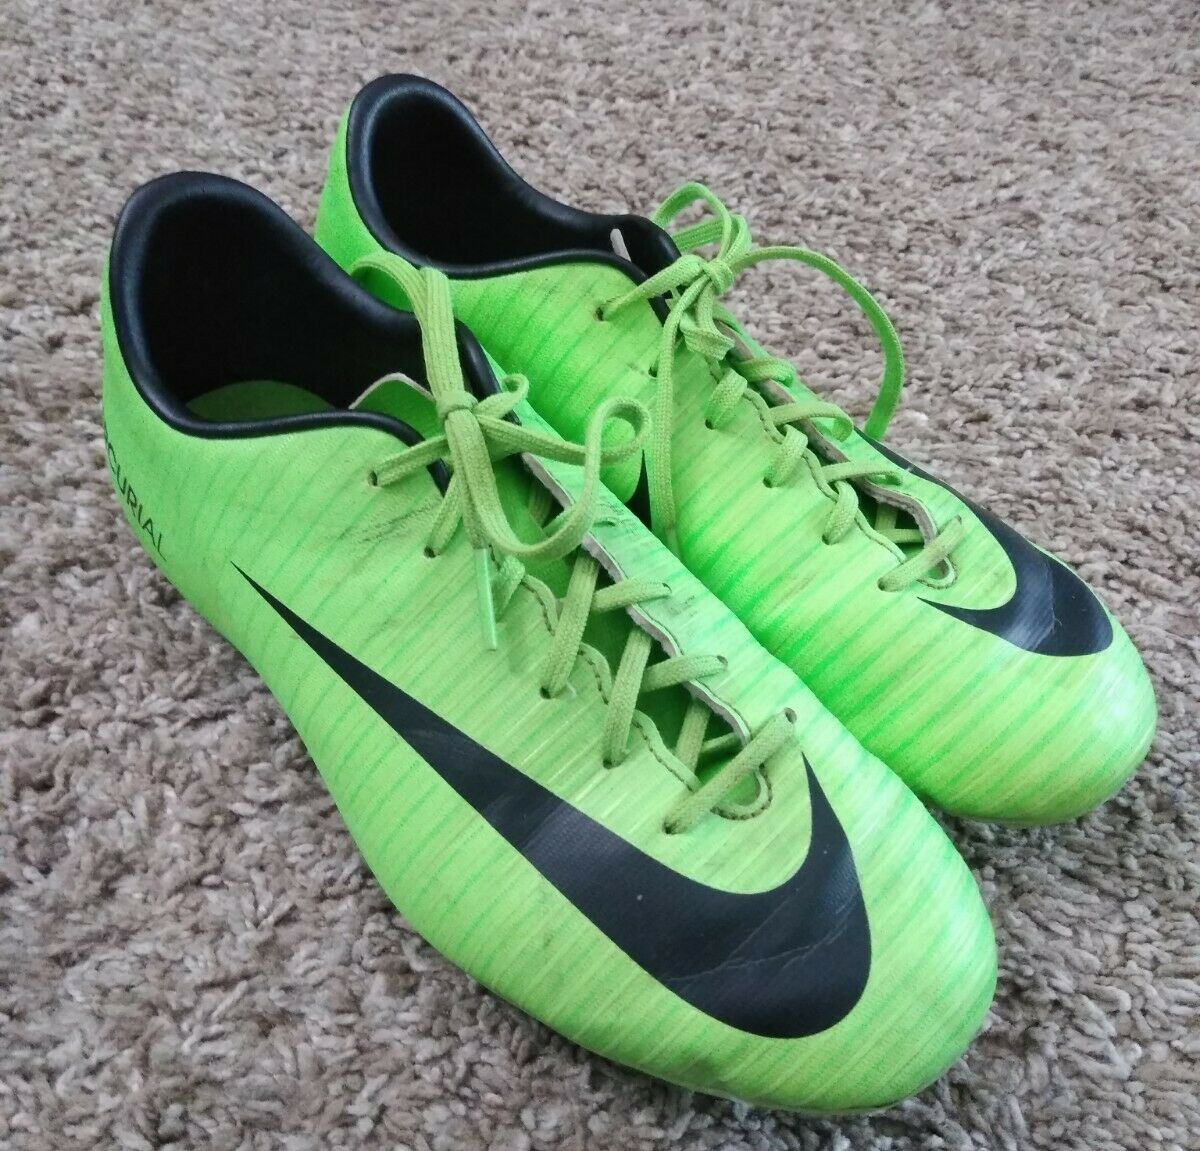 Nike Mercurial Youth Soccer Cleats Size 5 Neon Green Activewear R